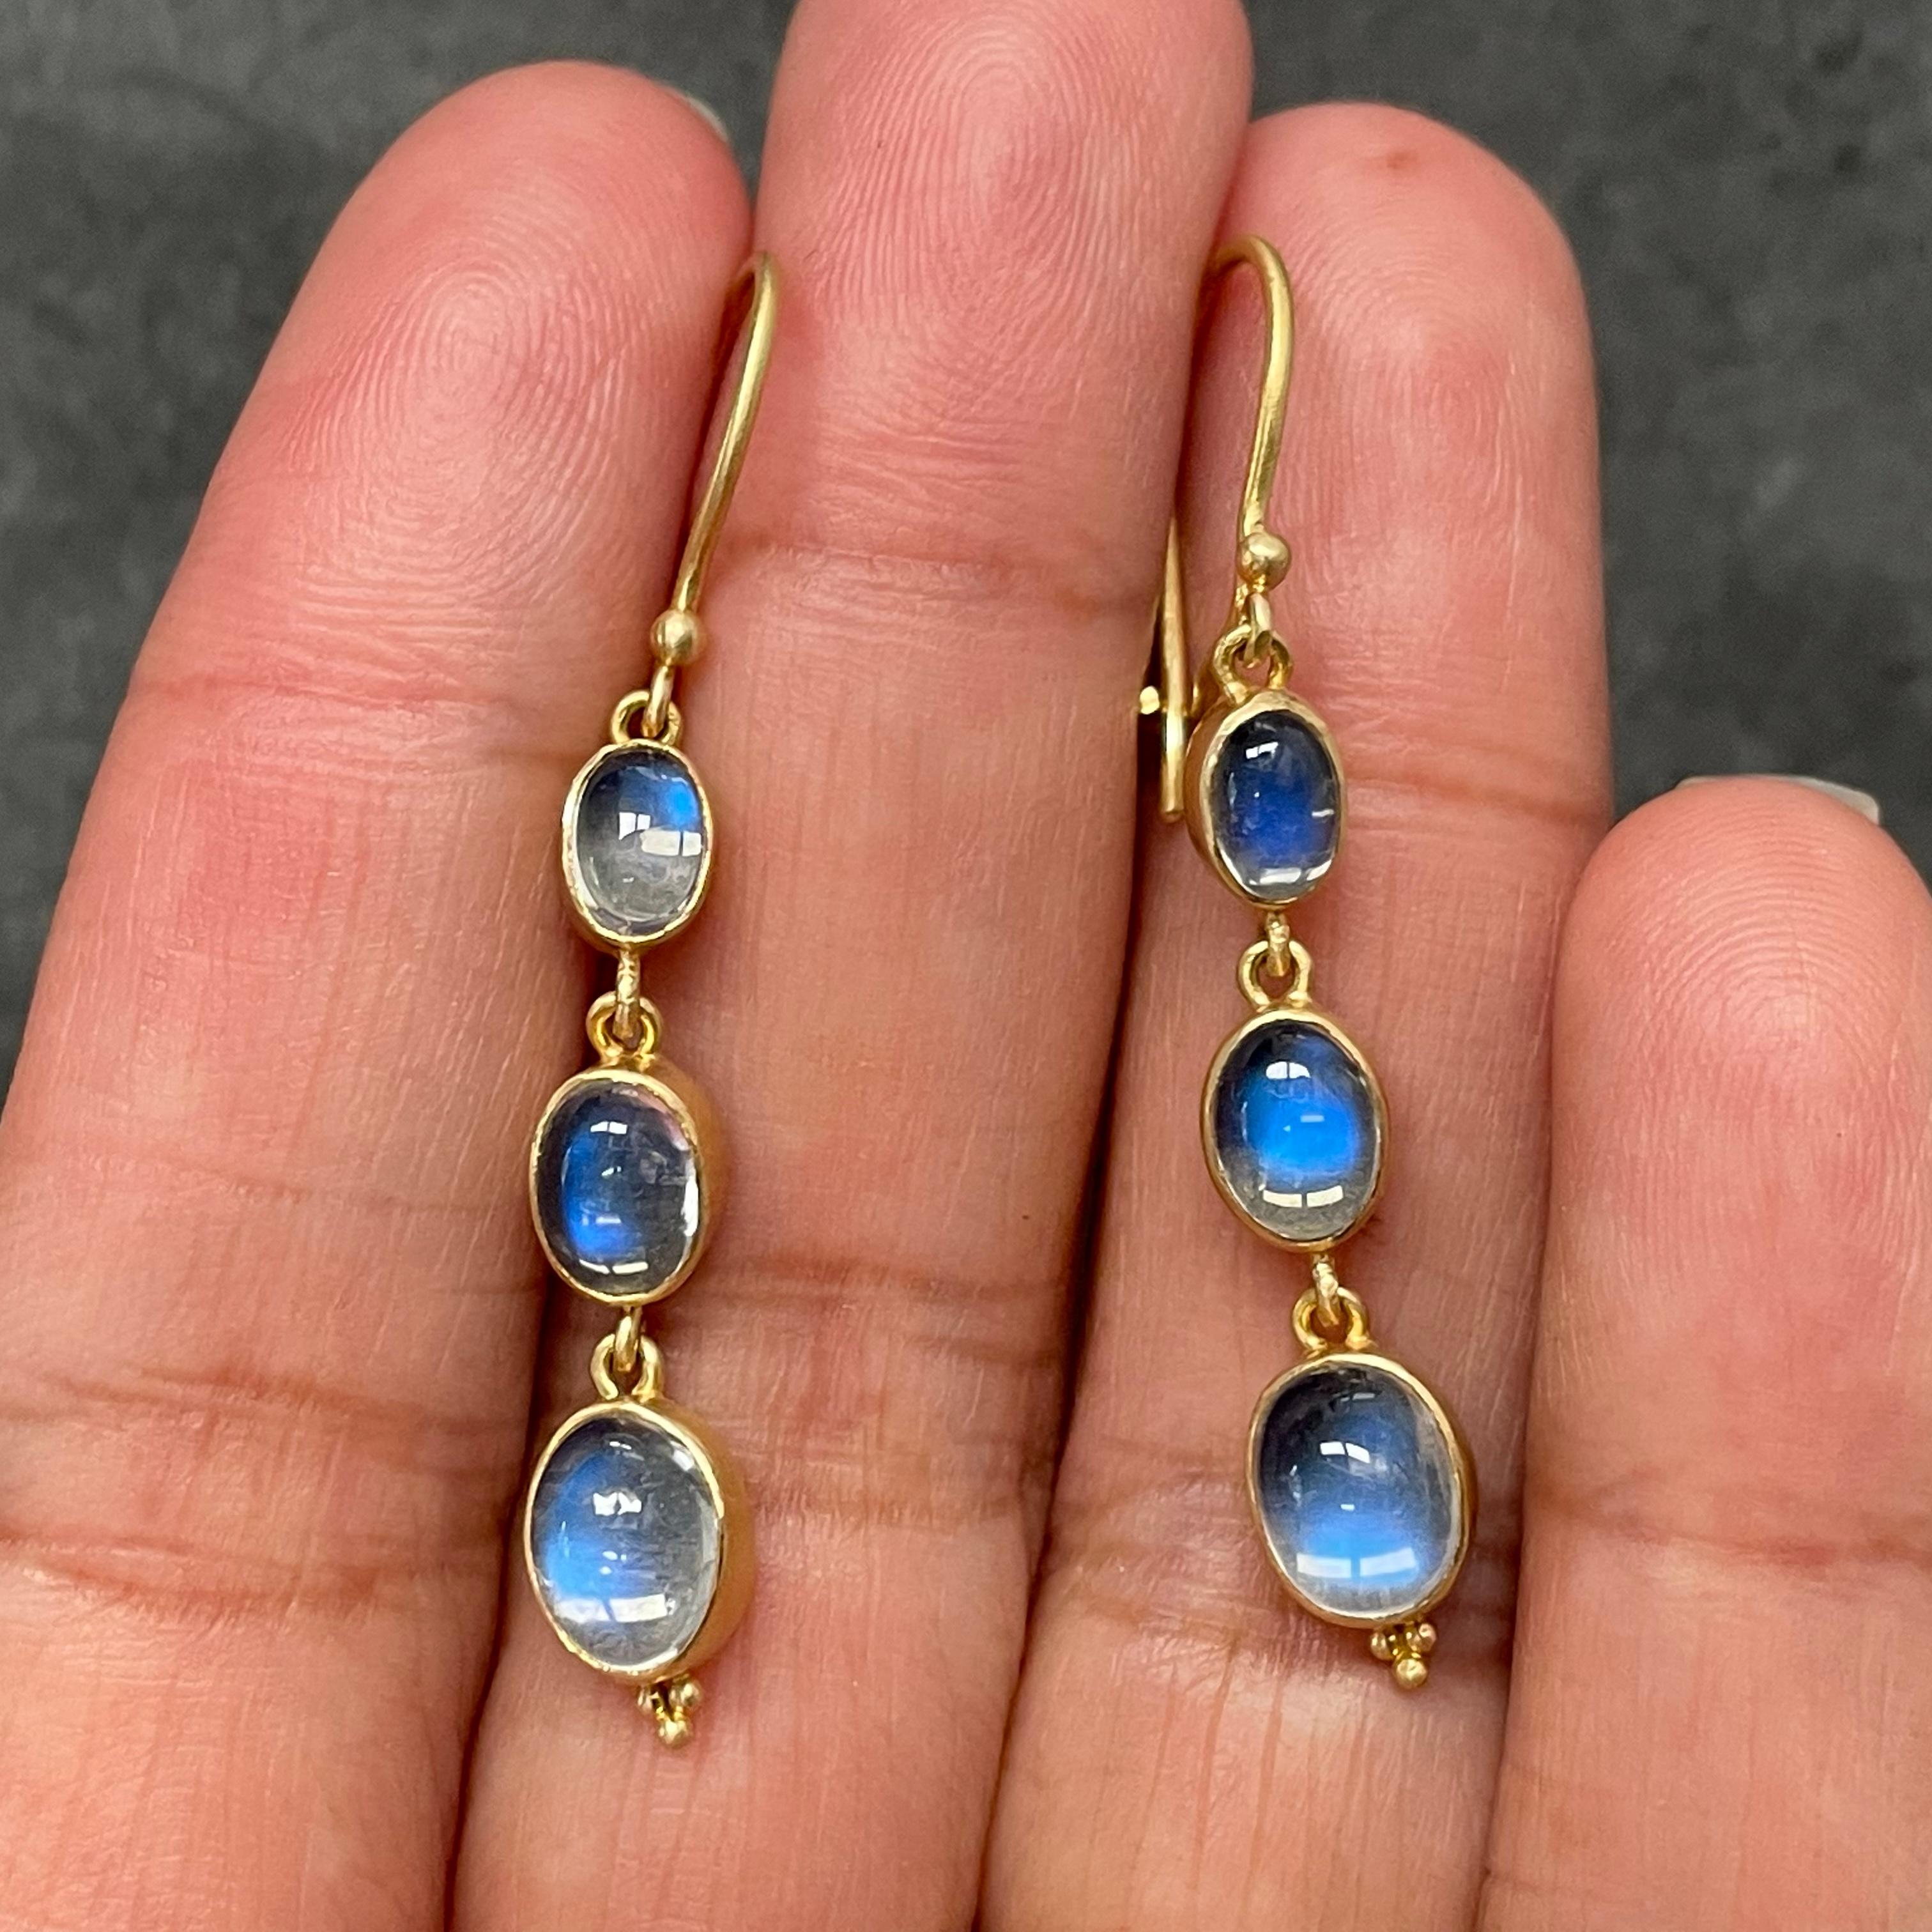 Three oval cabochons of graduated sized rainbow moonstone ( 4x6, 5x7, and 6x8 mm ) set in simple matte-finish 18K gold bezels dangle below safety clasp wires in this simple yet elegant design.  You can't go wrong with the beautiful shimmering blues